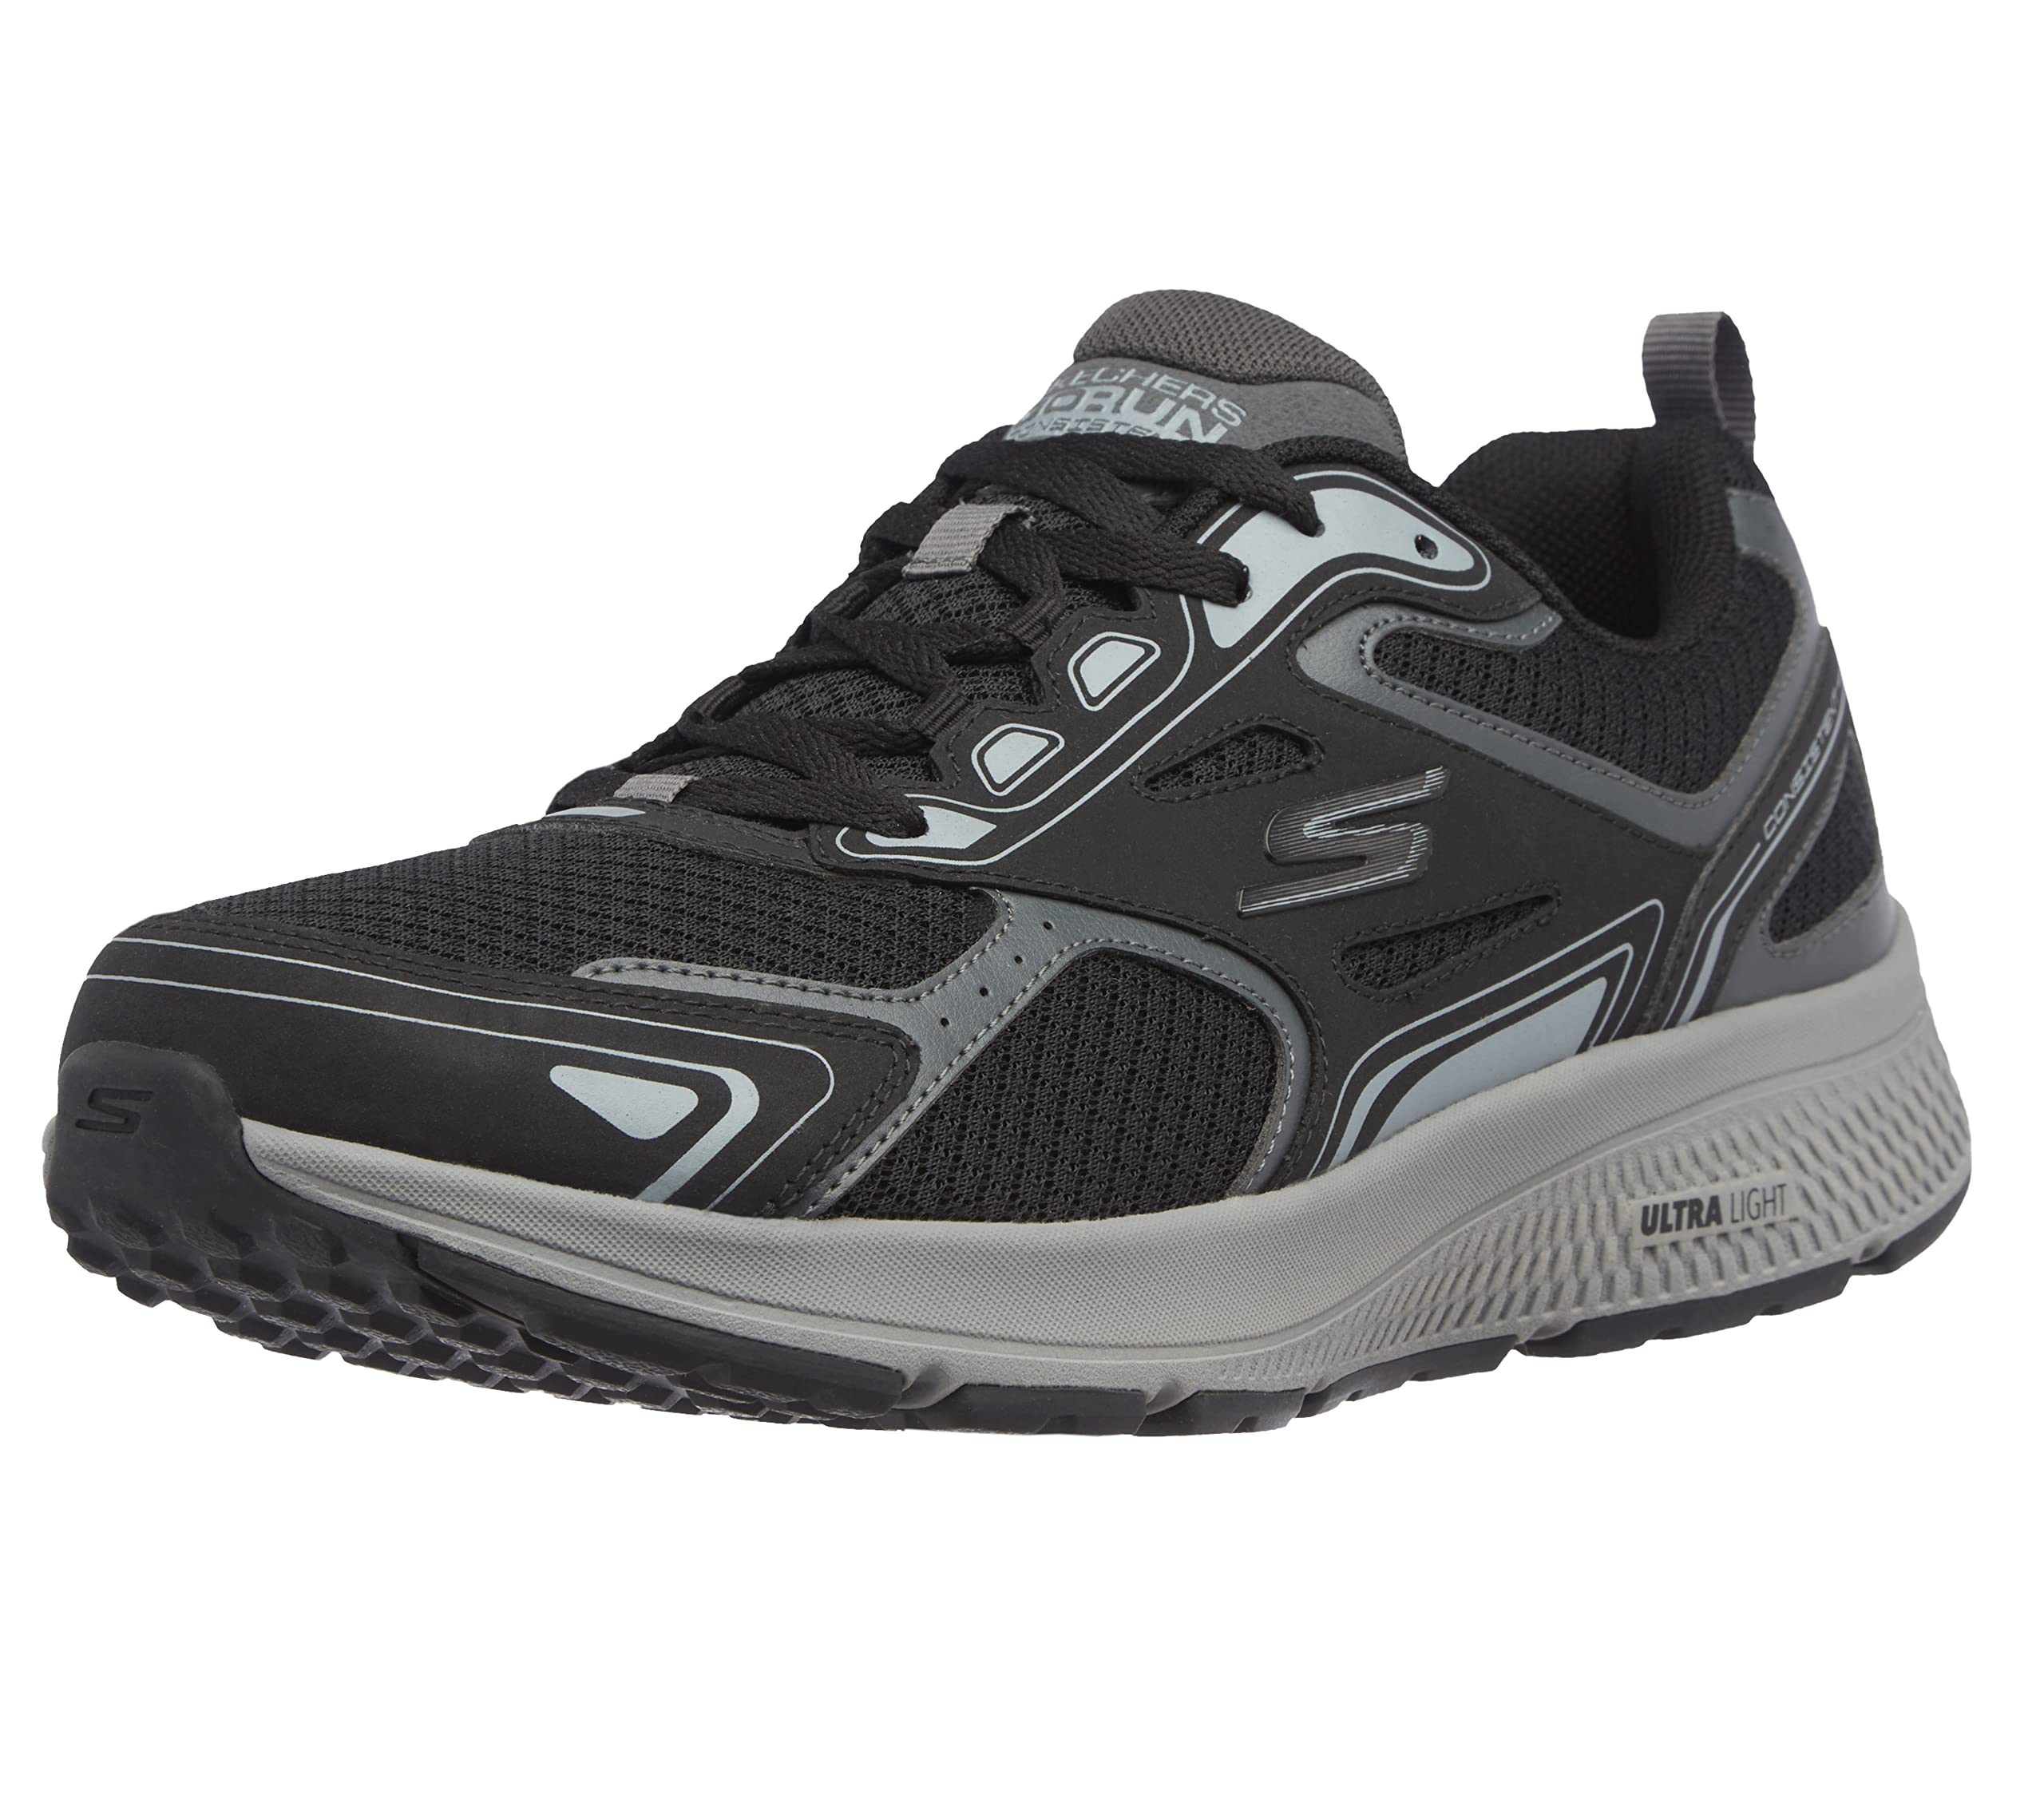 Skechers Men's GOrun Consistent-Athletic Workout Running Walking Shoe Sneaker with Air Cooled Foam